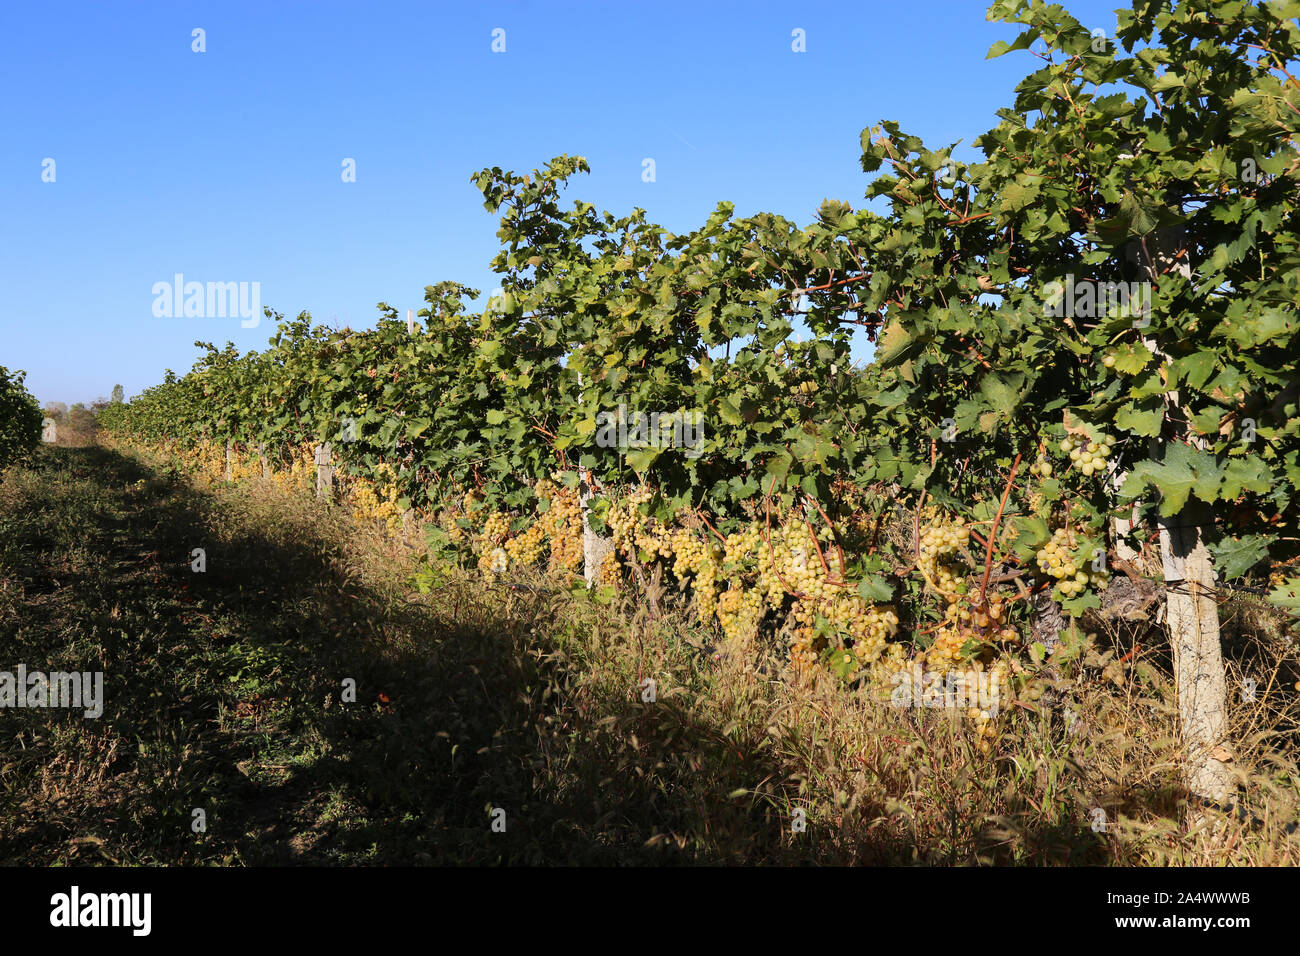 Growing grapes for white and red wine Stock Photo